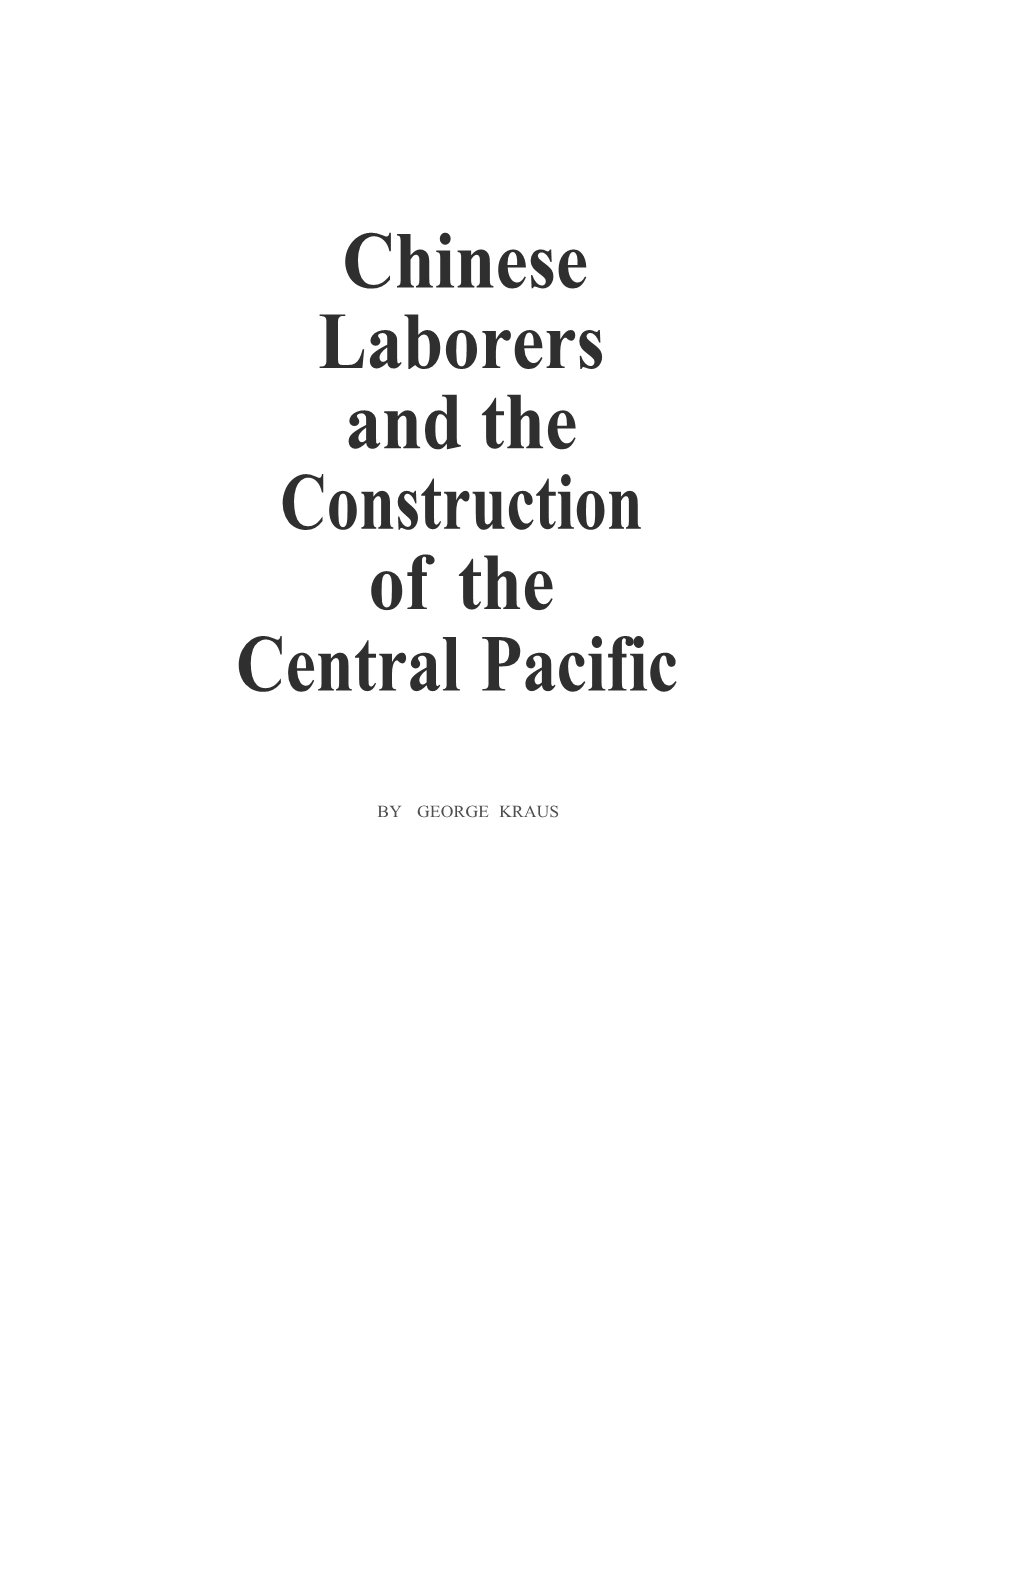 Chinese Laborers and the Construction of the Central Pacific